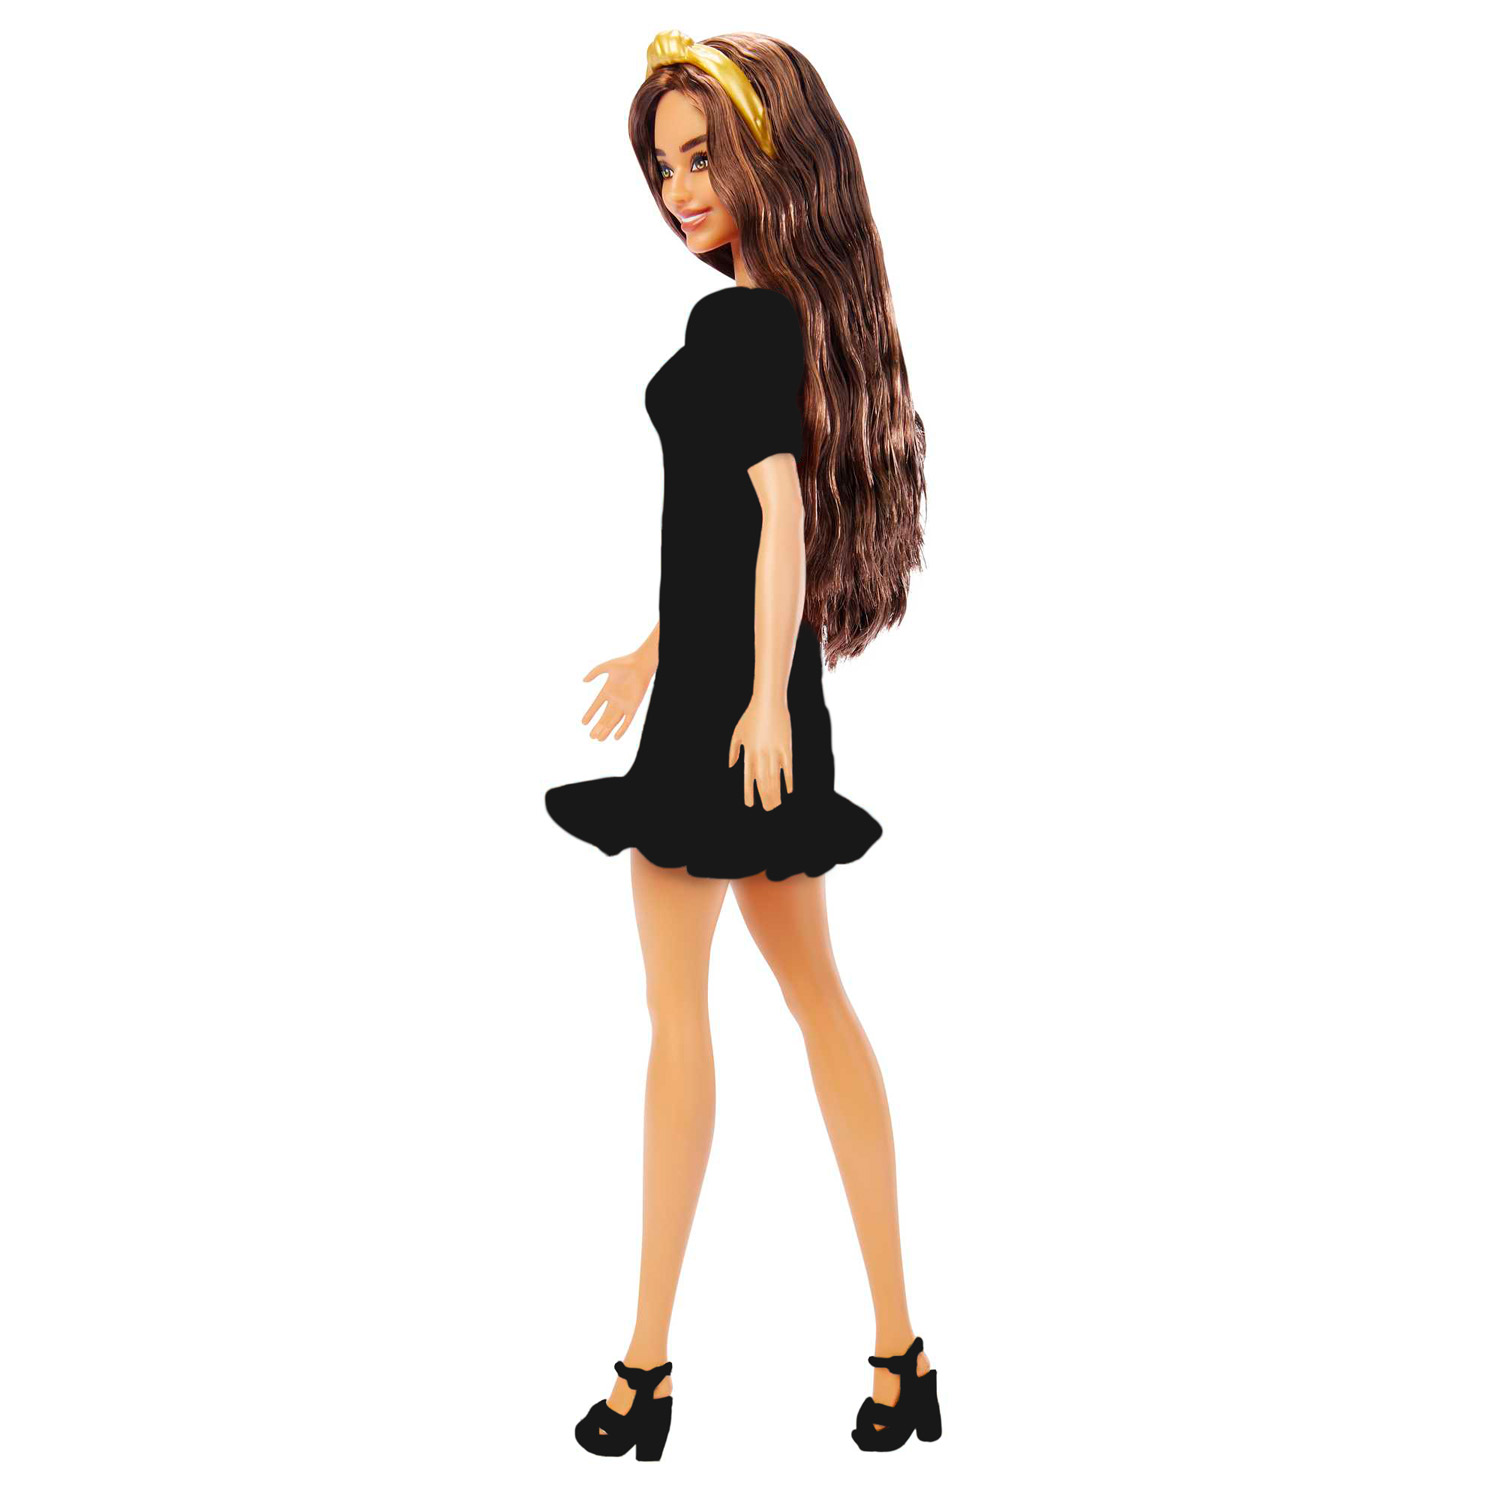 Barbie Styled By You con capelli castani mossi - Barbie